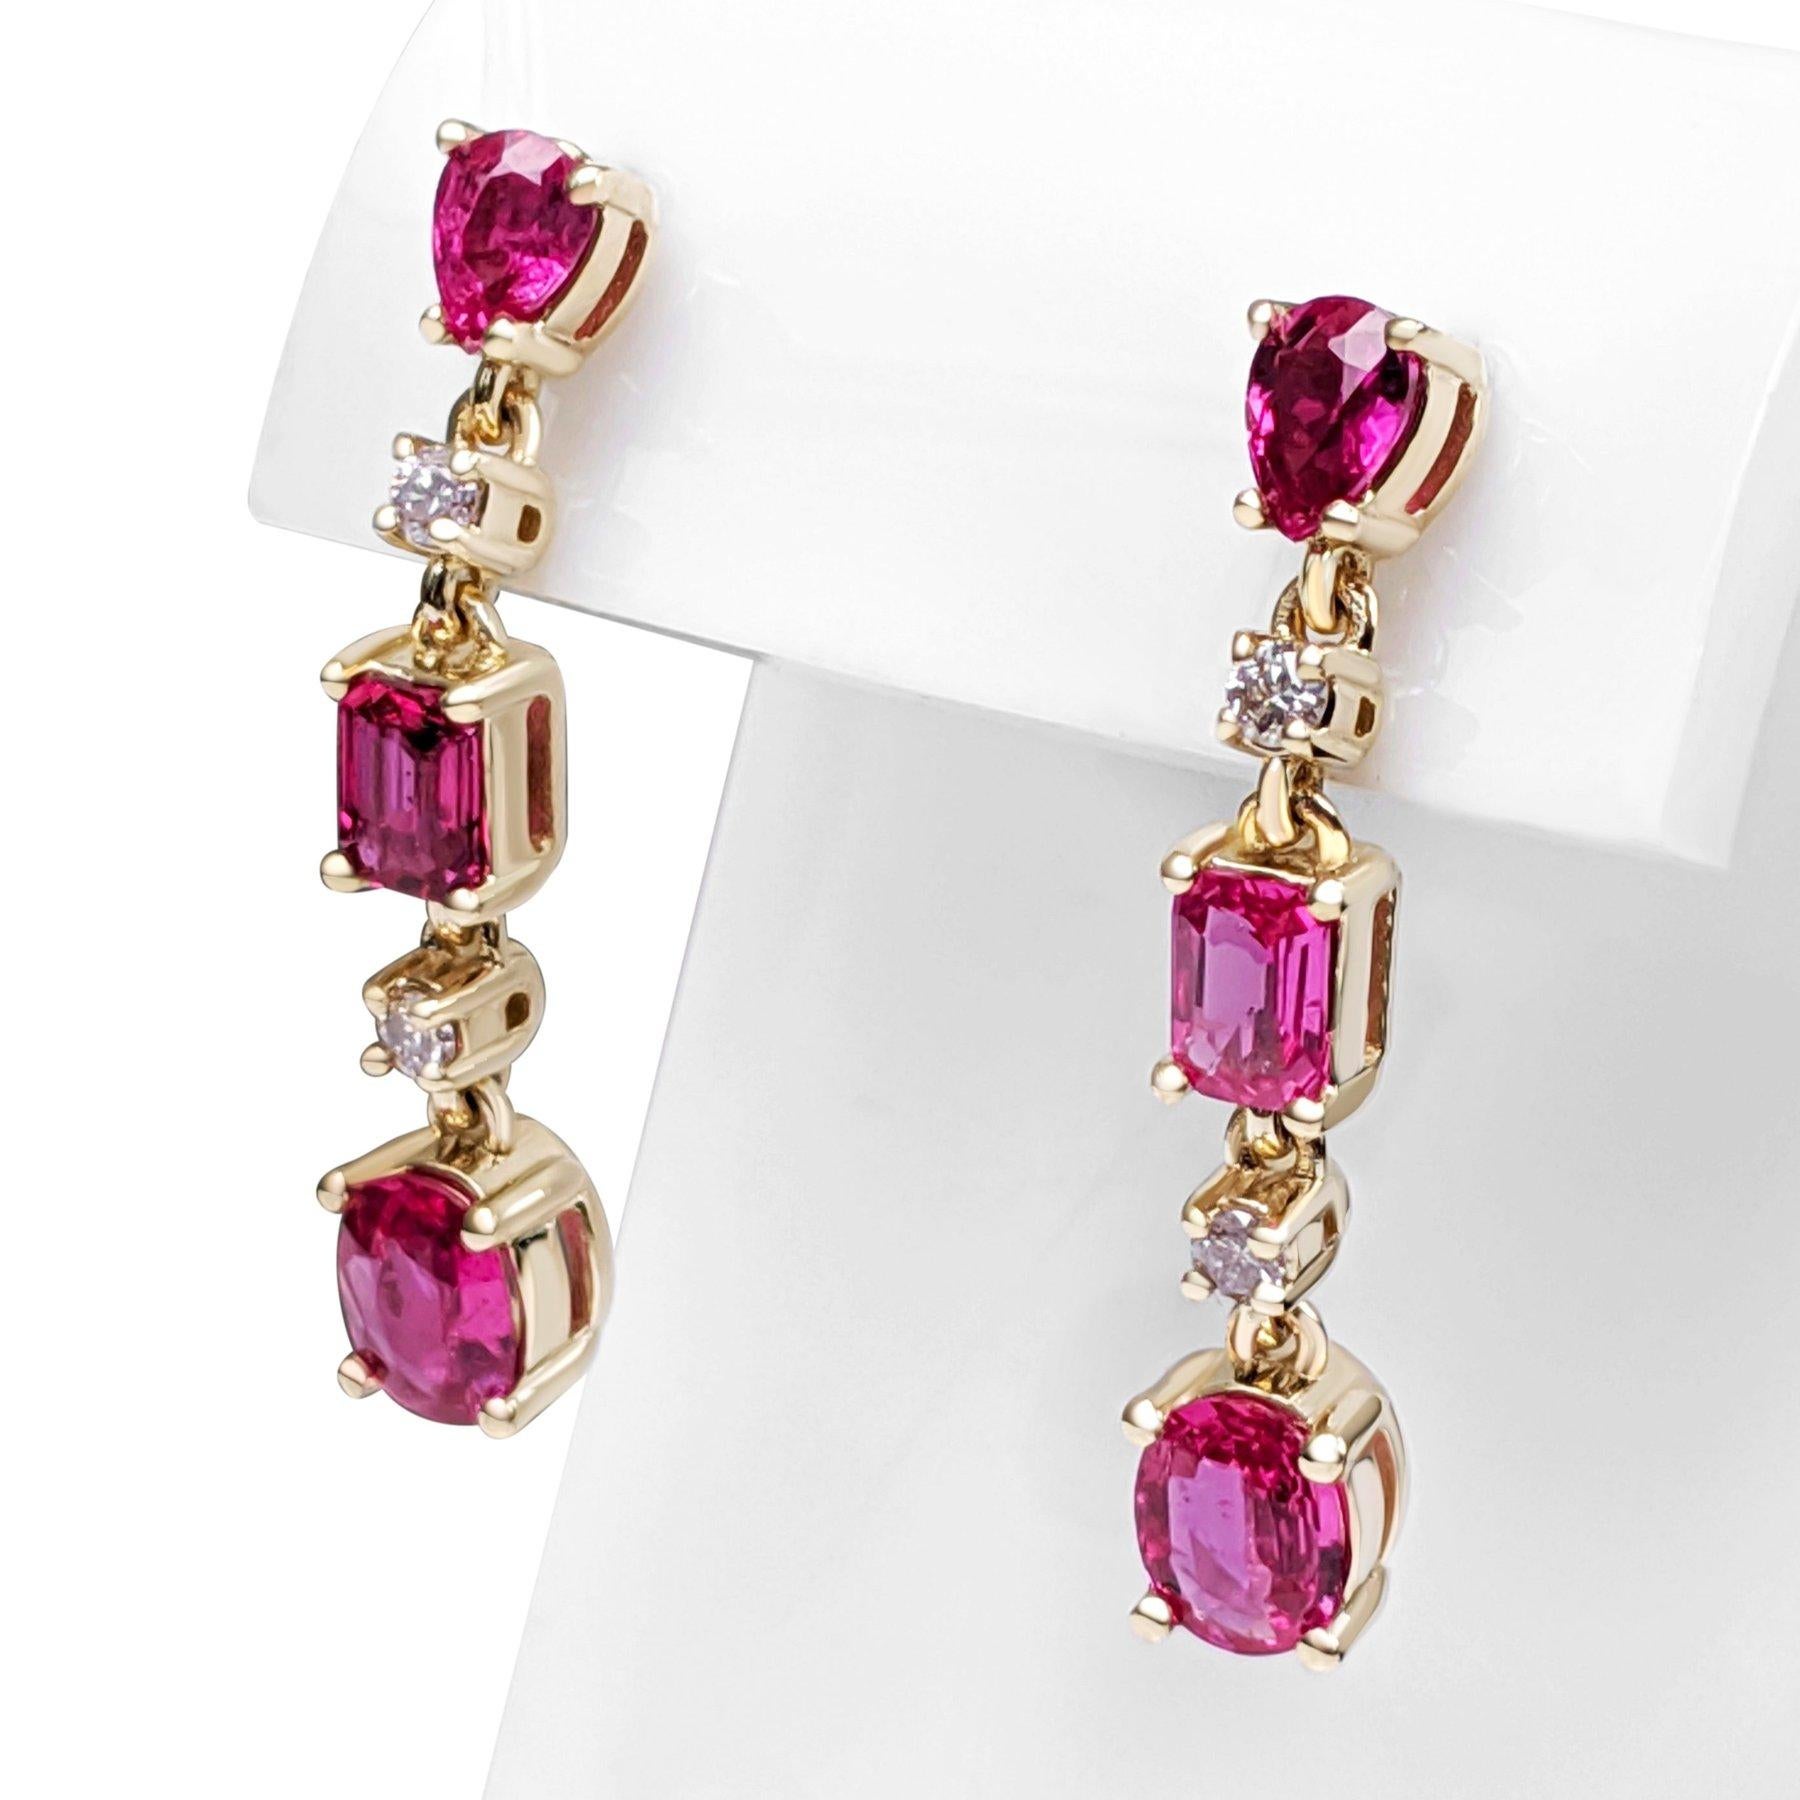 Art Deco $1 NO RESERVE! NO HEAT 1.40Ct Ruby & 0.08Ct Fancy Pink 14kt Yellow gold Earrings